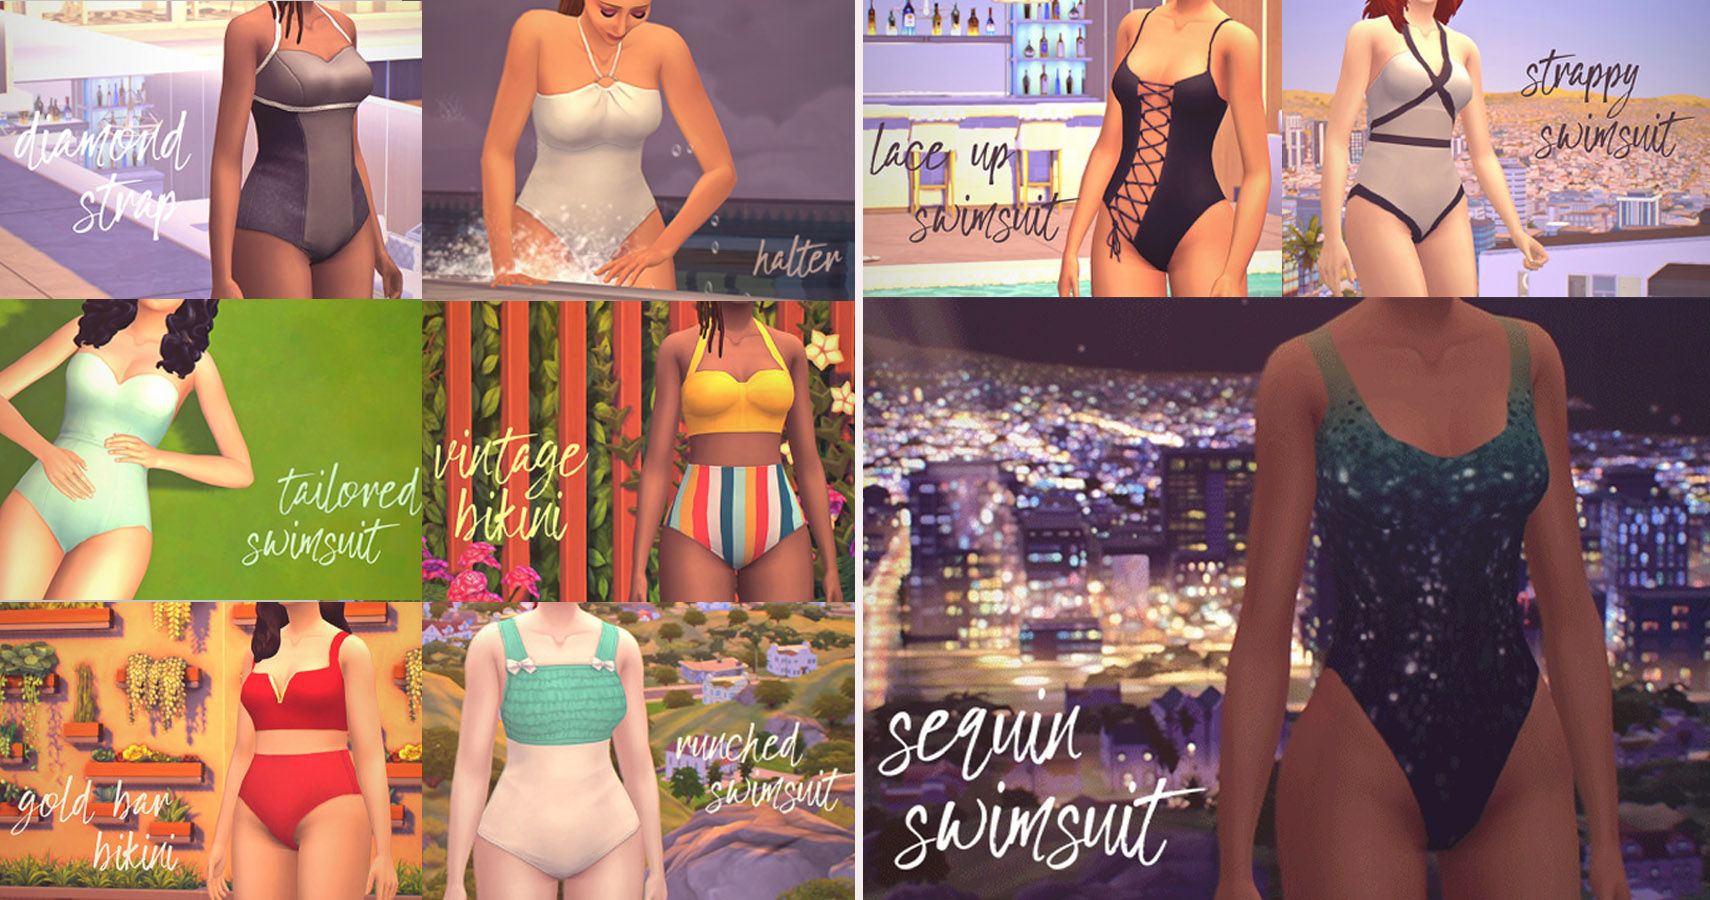 left side 6 swimsuit designs, right side 3 extra designs. All are on sims but don't shows heads or full length shots.